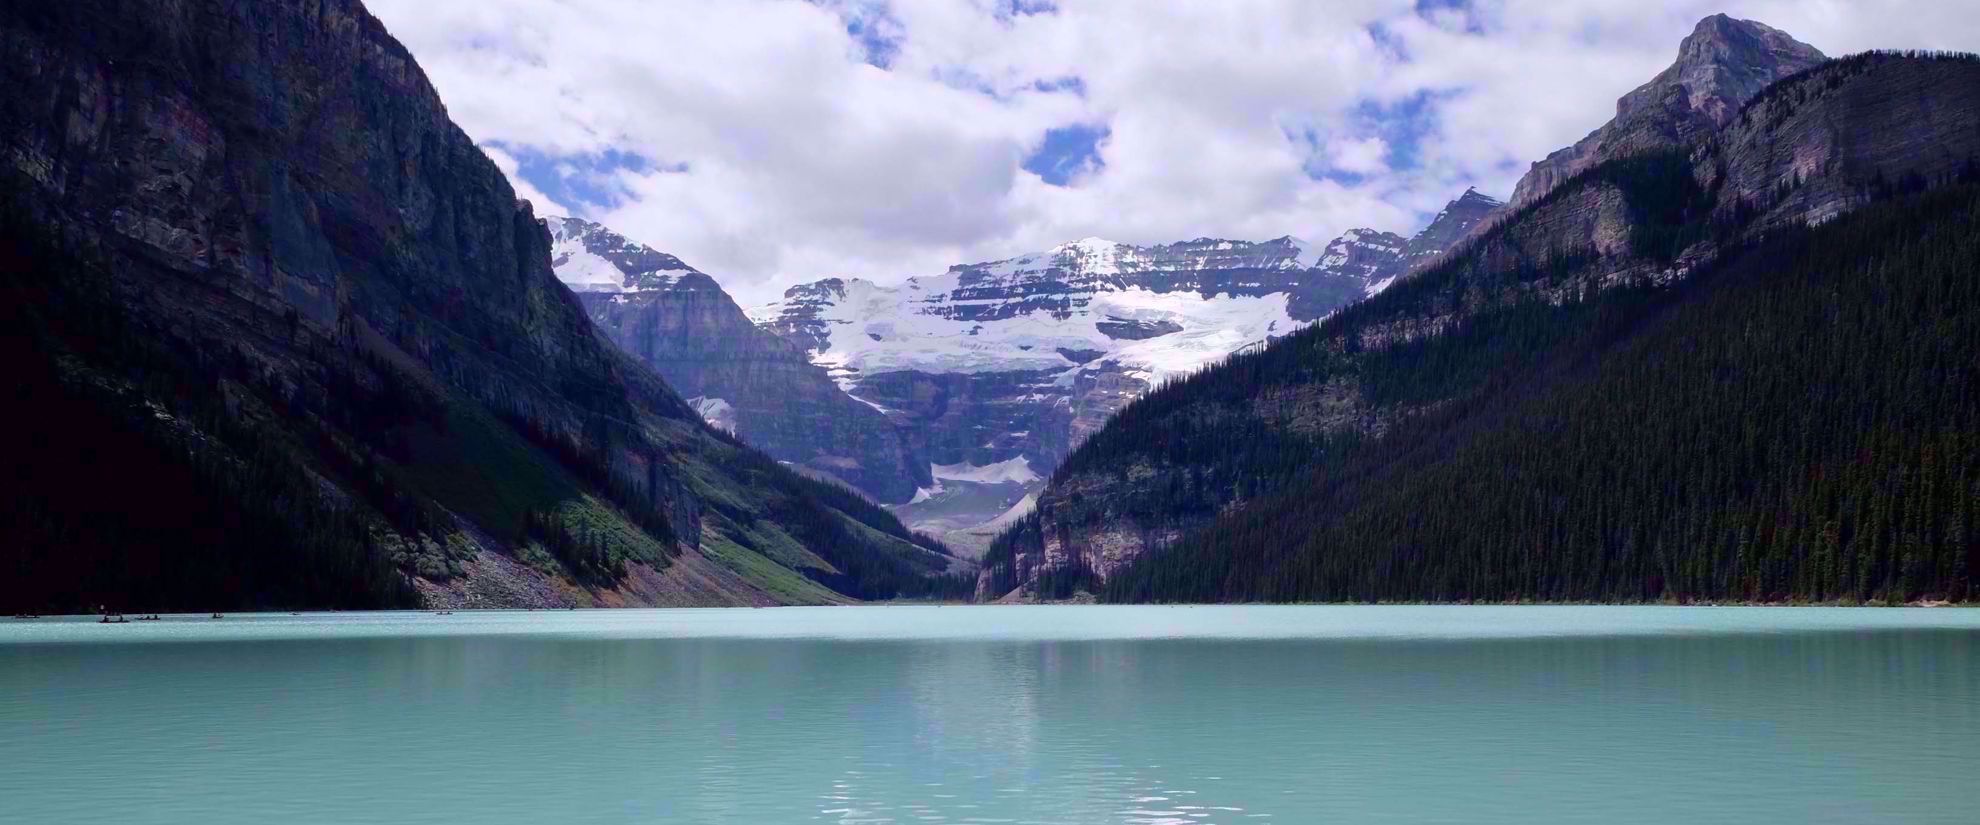 Beautiful turquoise lake in canada surrounded by mountains